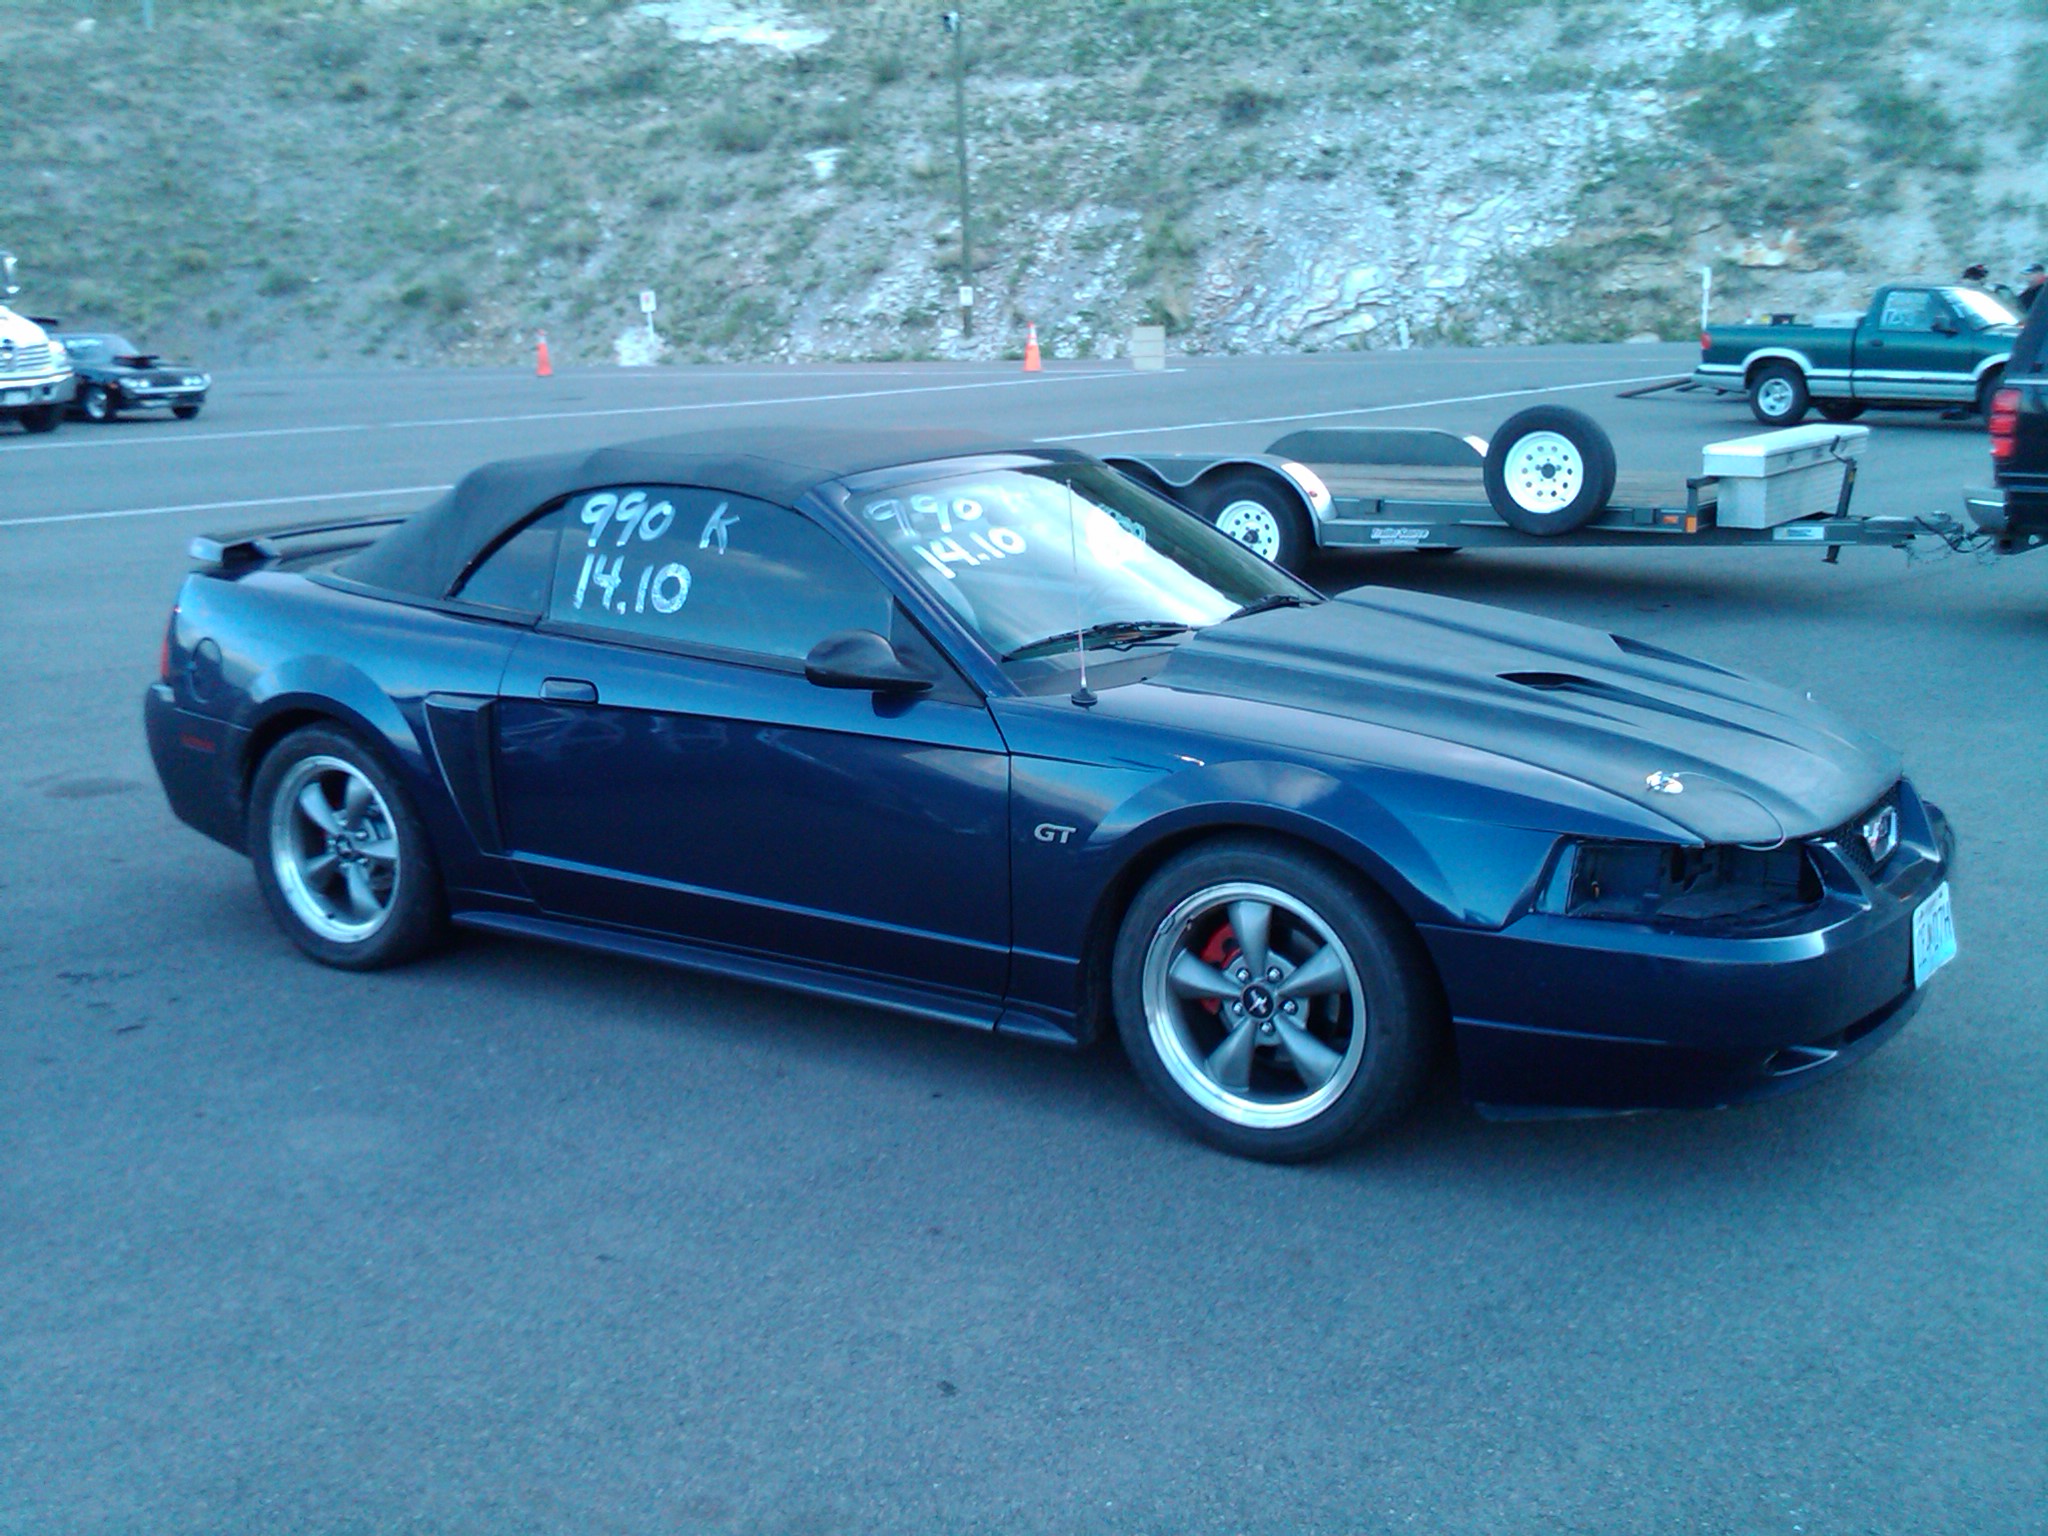 2003 Ford mustang gt 0-60 time #2